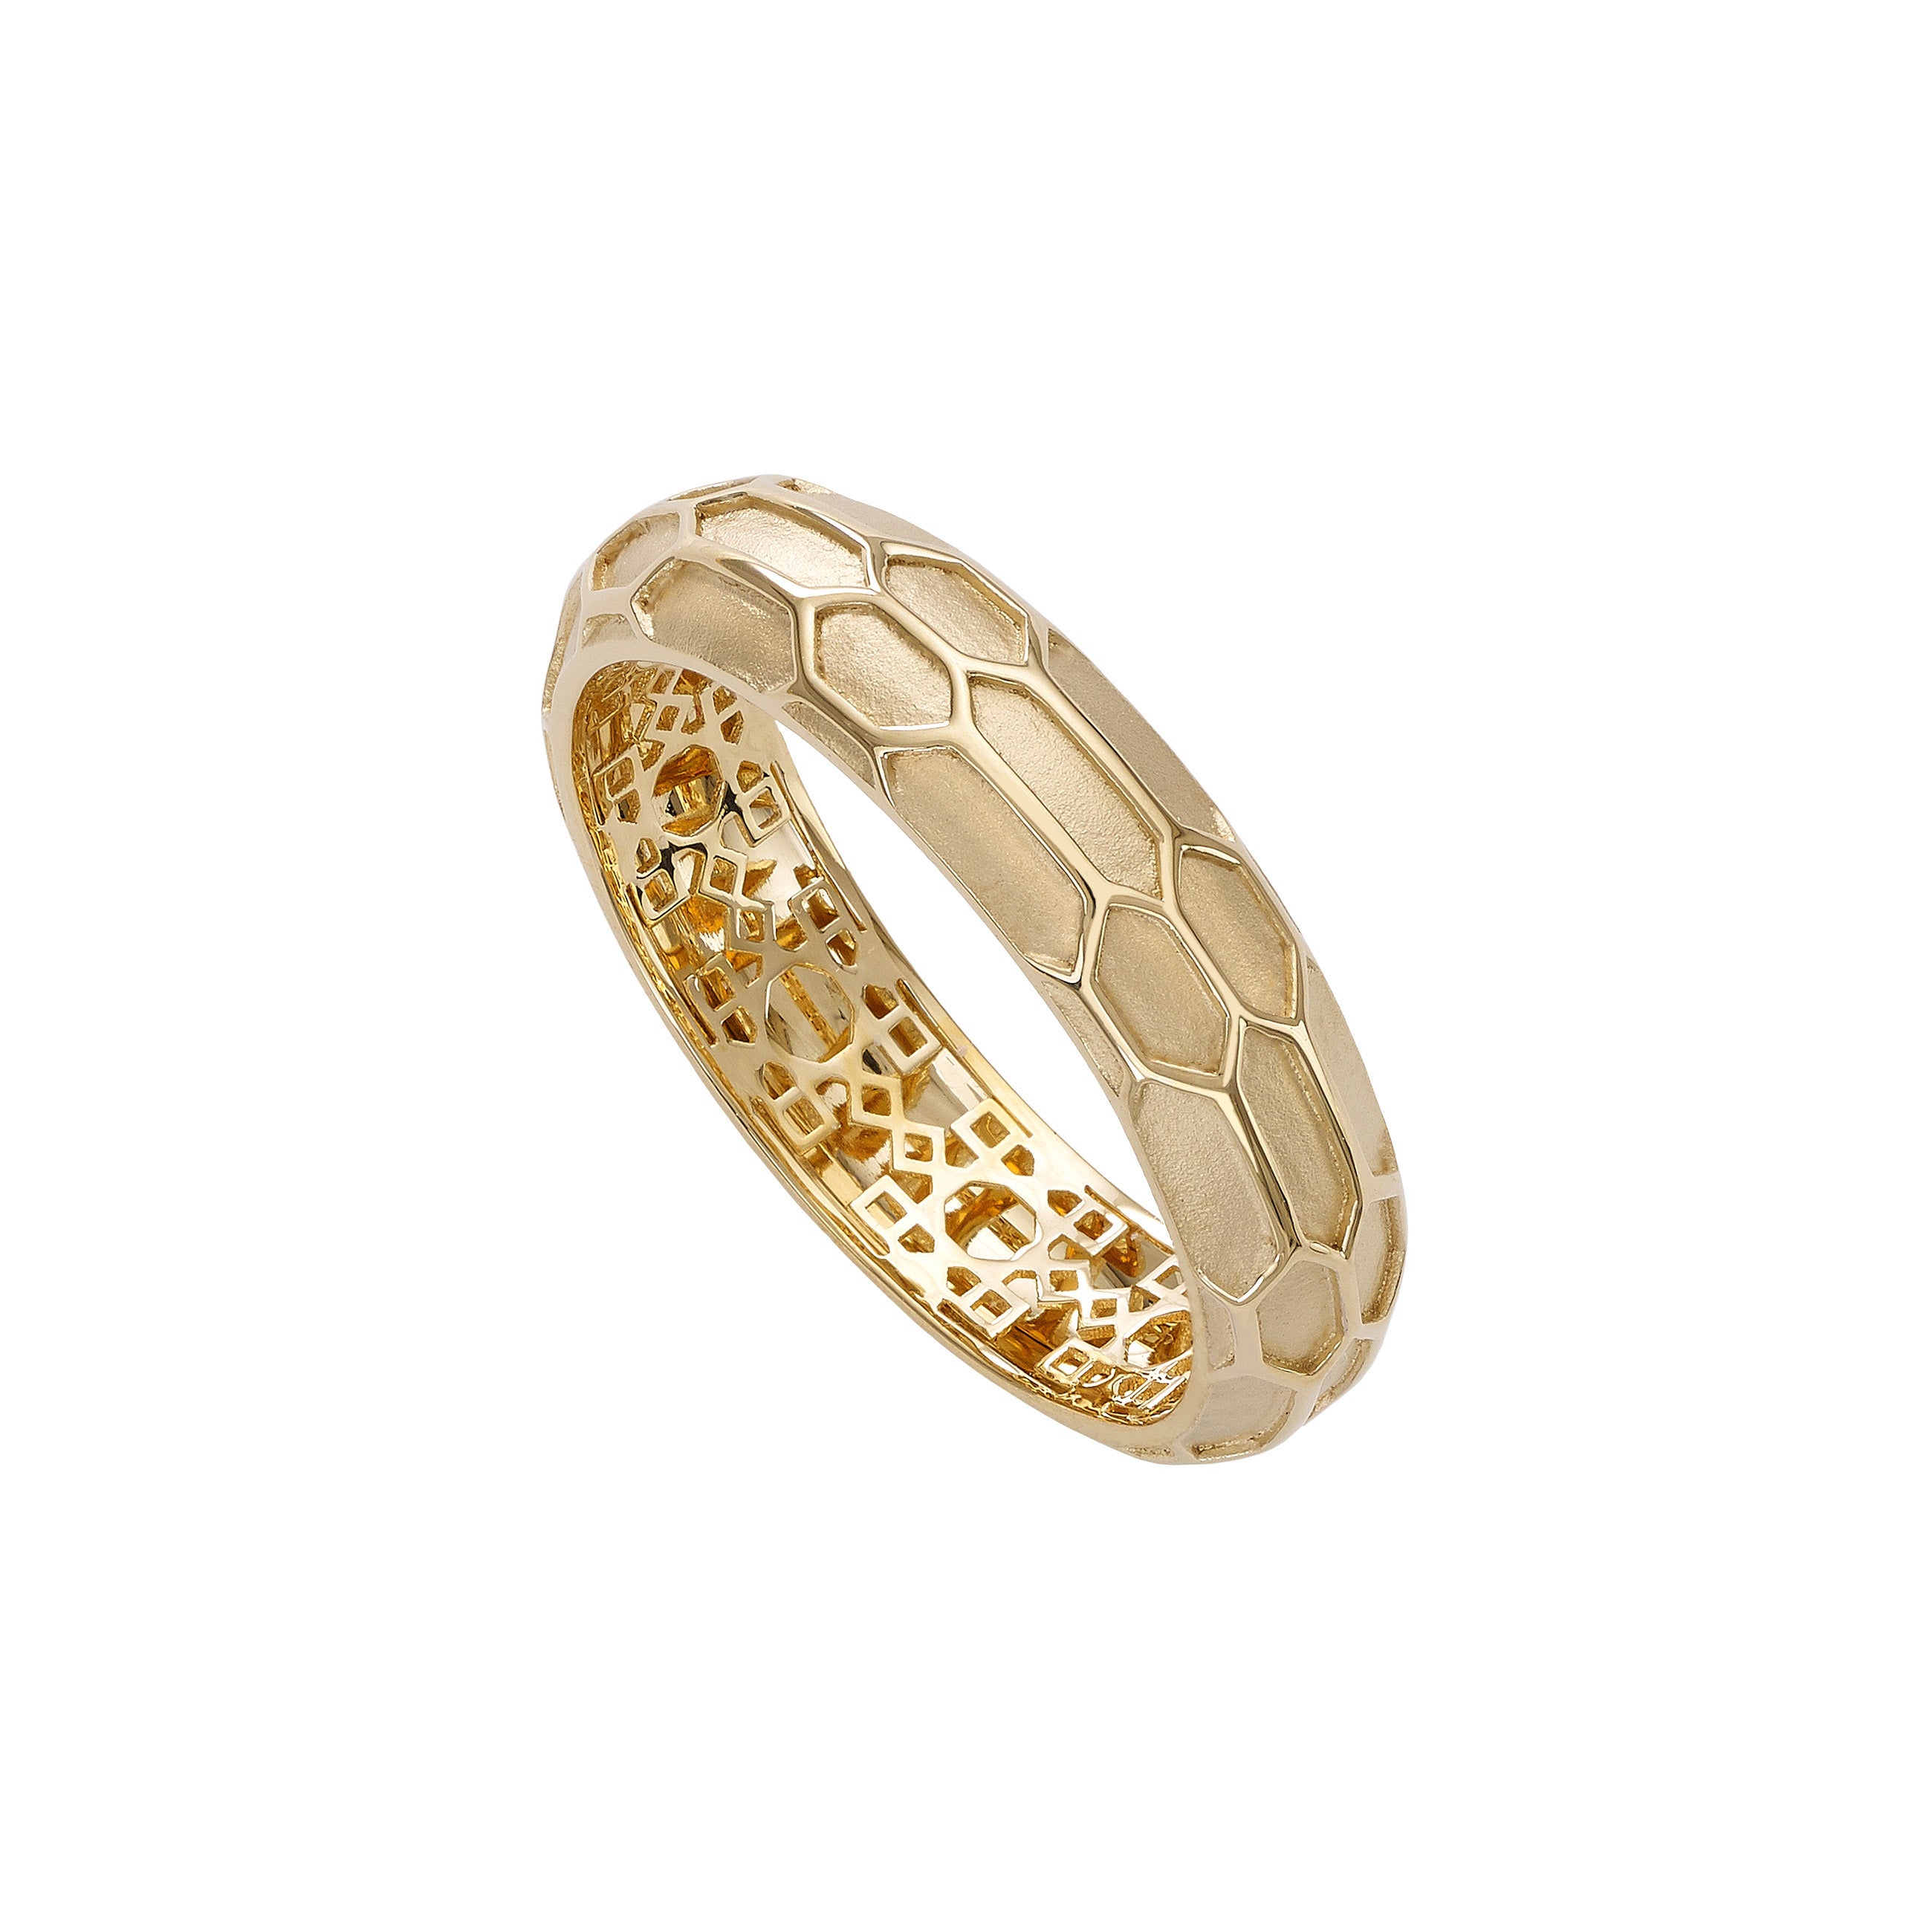 The Ophidian Scales Ring - Plain Gold Devam